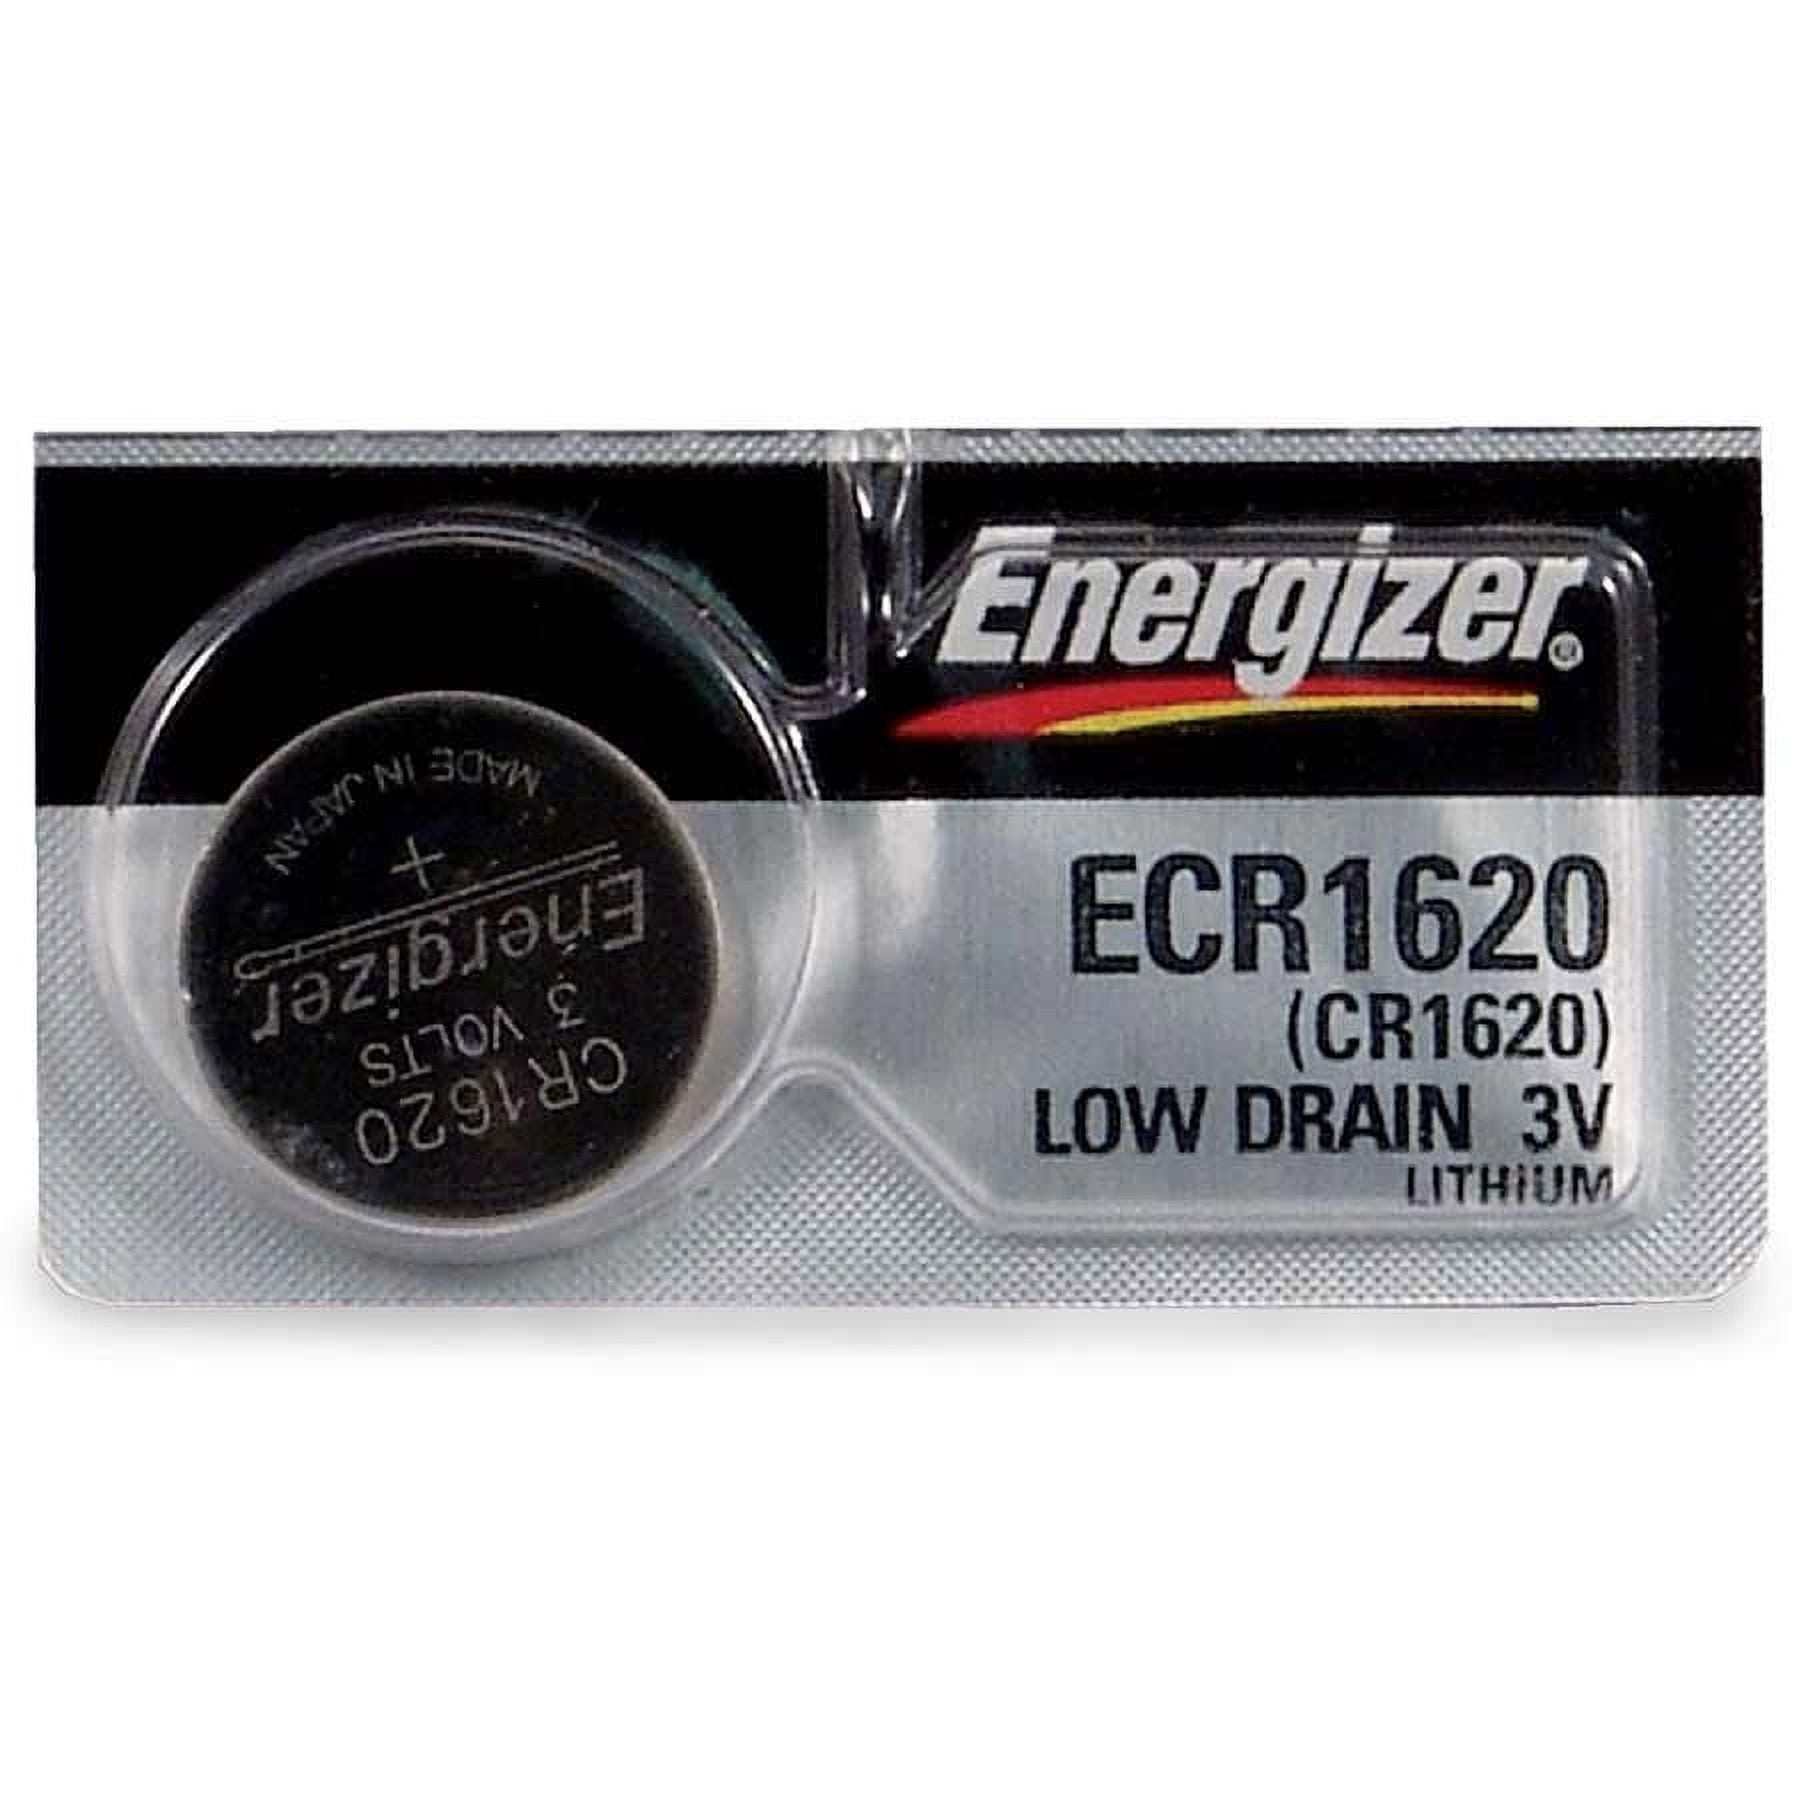 ECR1620-CD [ENERGIZER CR-1620 3V / SINGLE CARDED] - $1.5 : Key Craze,  Wholesale Key Blanks and Accessories